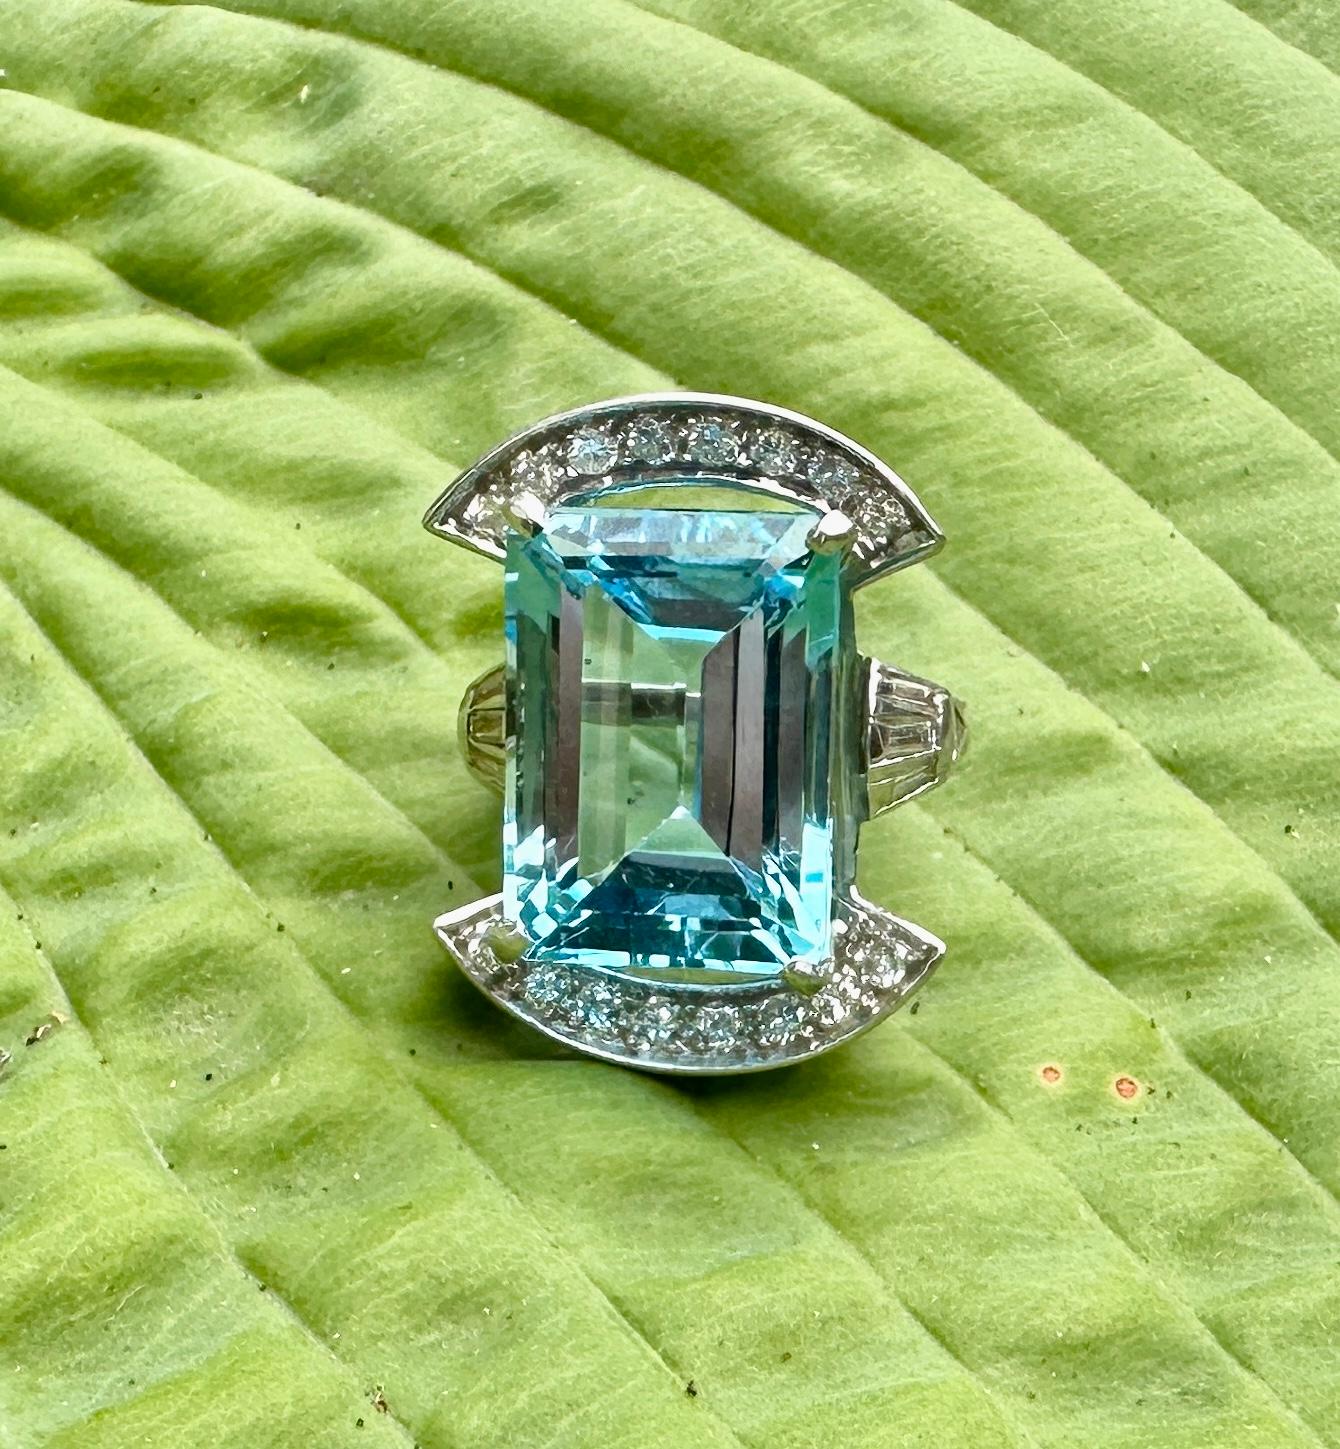 THIS IS A MAGNIFICENT ANTIQUE ART DECO 19 CARAT EMERALD CUT FINE BLUE TOPAZ RING WITH 24 GORGEOUS ROUND, EMERALD AND FANCY TRIANGLE CUT DIAMONDS SET IN A STUNNING DESIGN IN PLATINUM.  
THE MAGNIFICENT MONUMENTAL 19 CARAT BLUE TOPAZ IS 18MM LONG AND